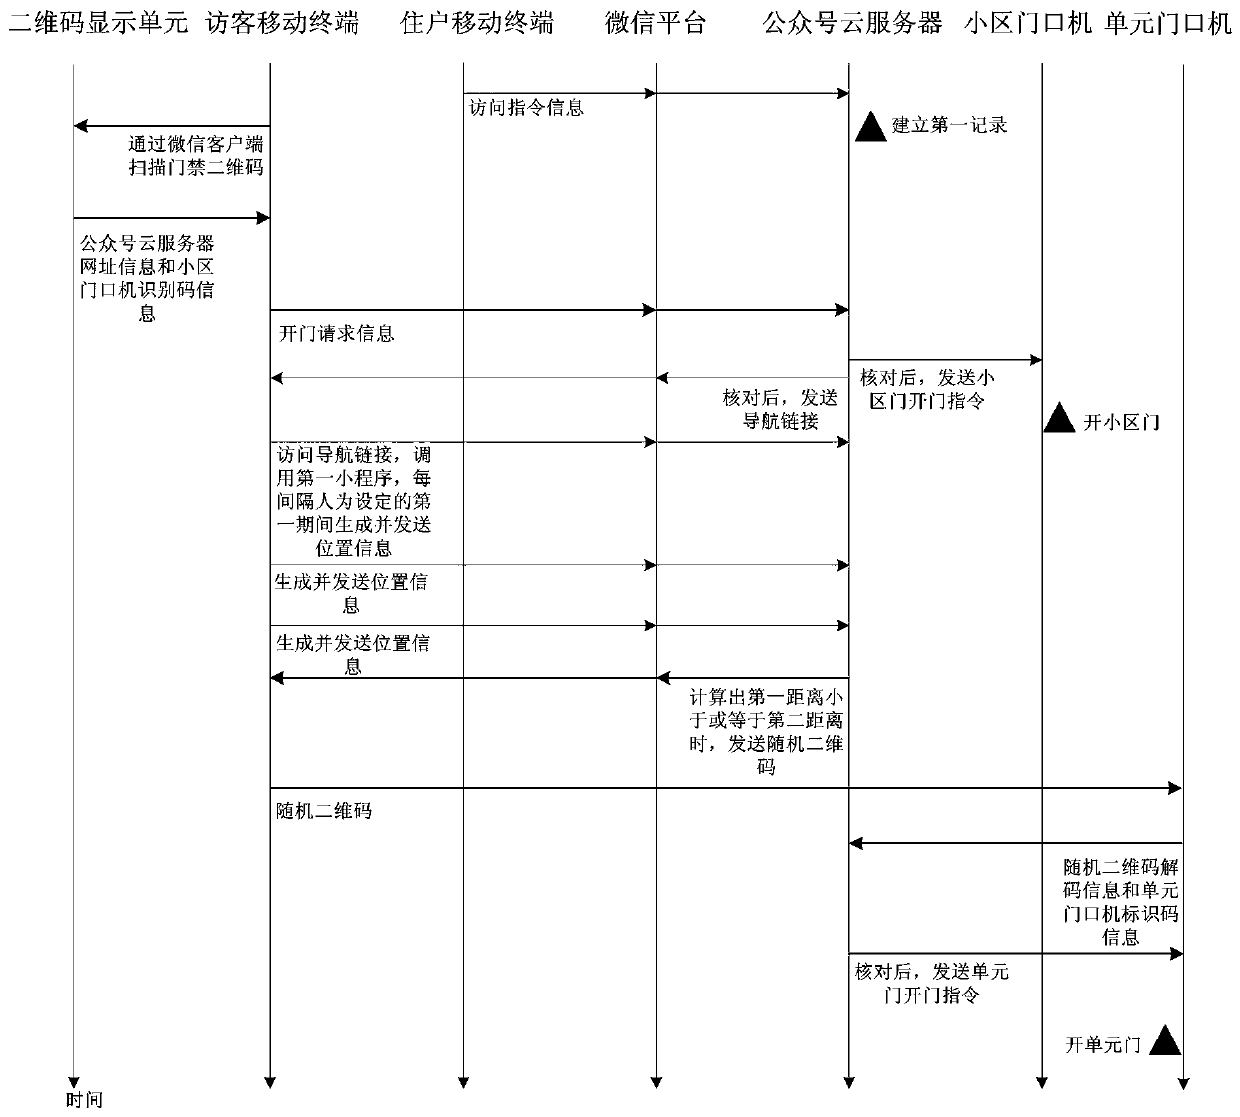 A WeChat-based community access control system and door opening method